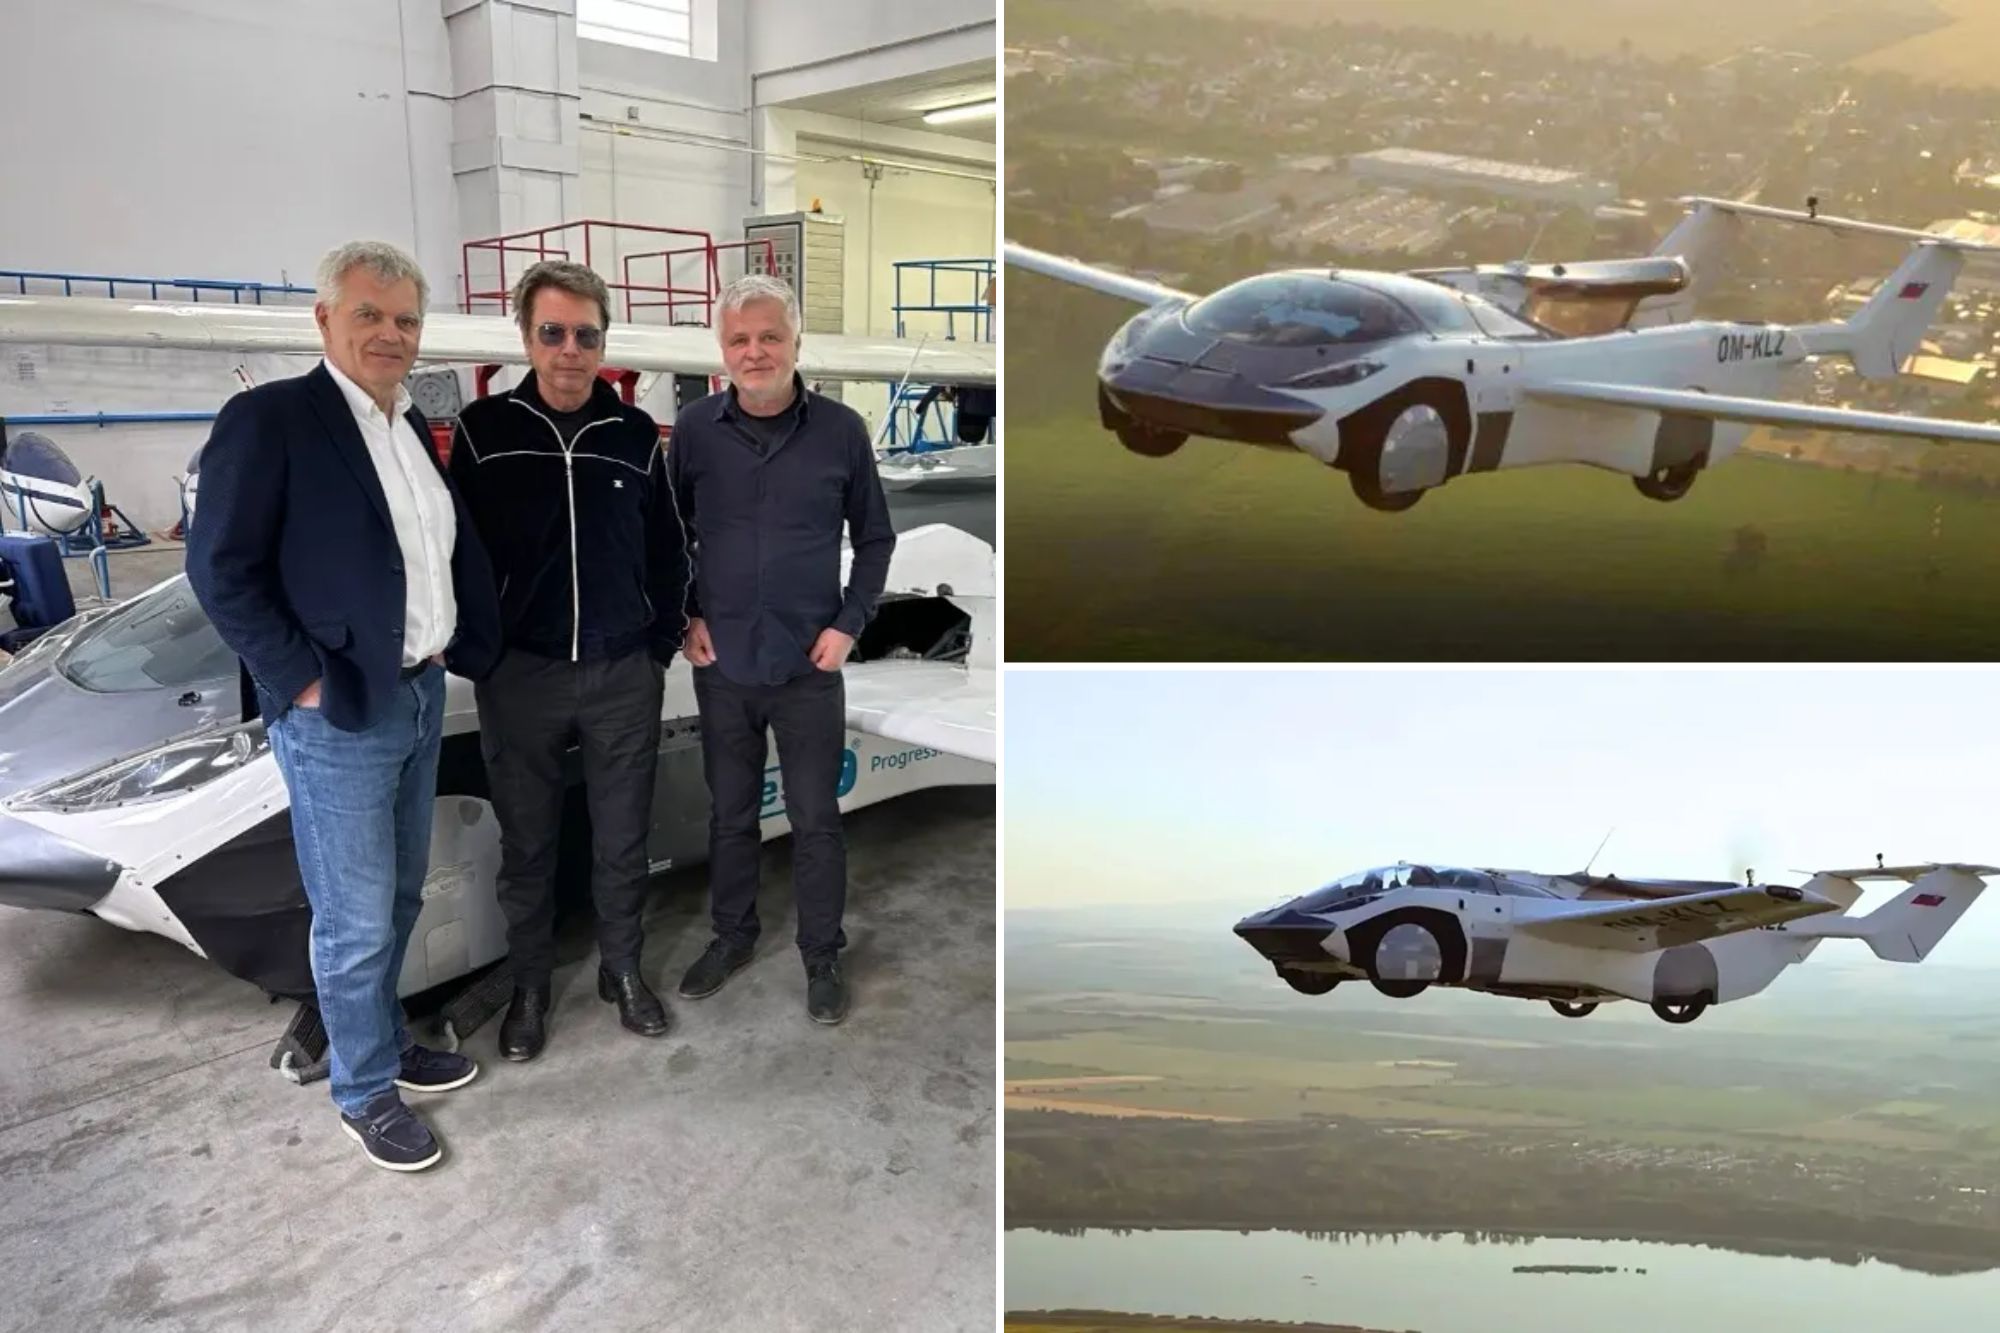 Legendary French electronic musician Jean-Michel Jarre became the first to hitch such a ride, soaring twice through the Slovakian skies in KleinVision's AirCar in front of captivated onlookers.